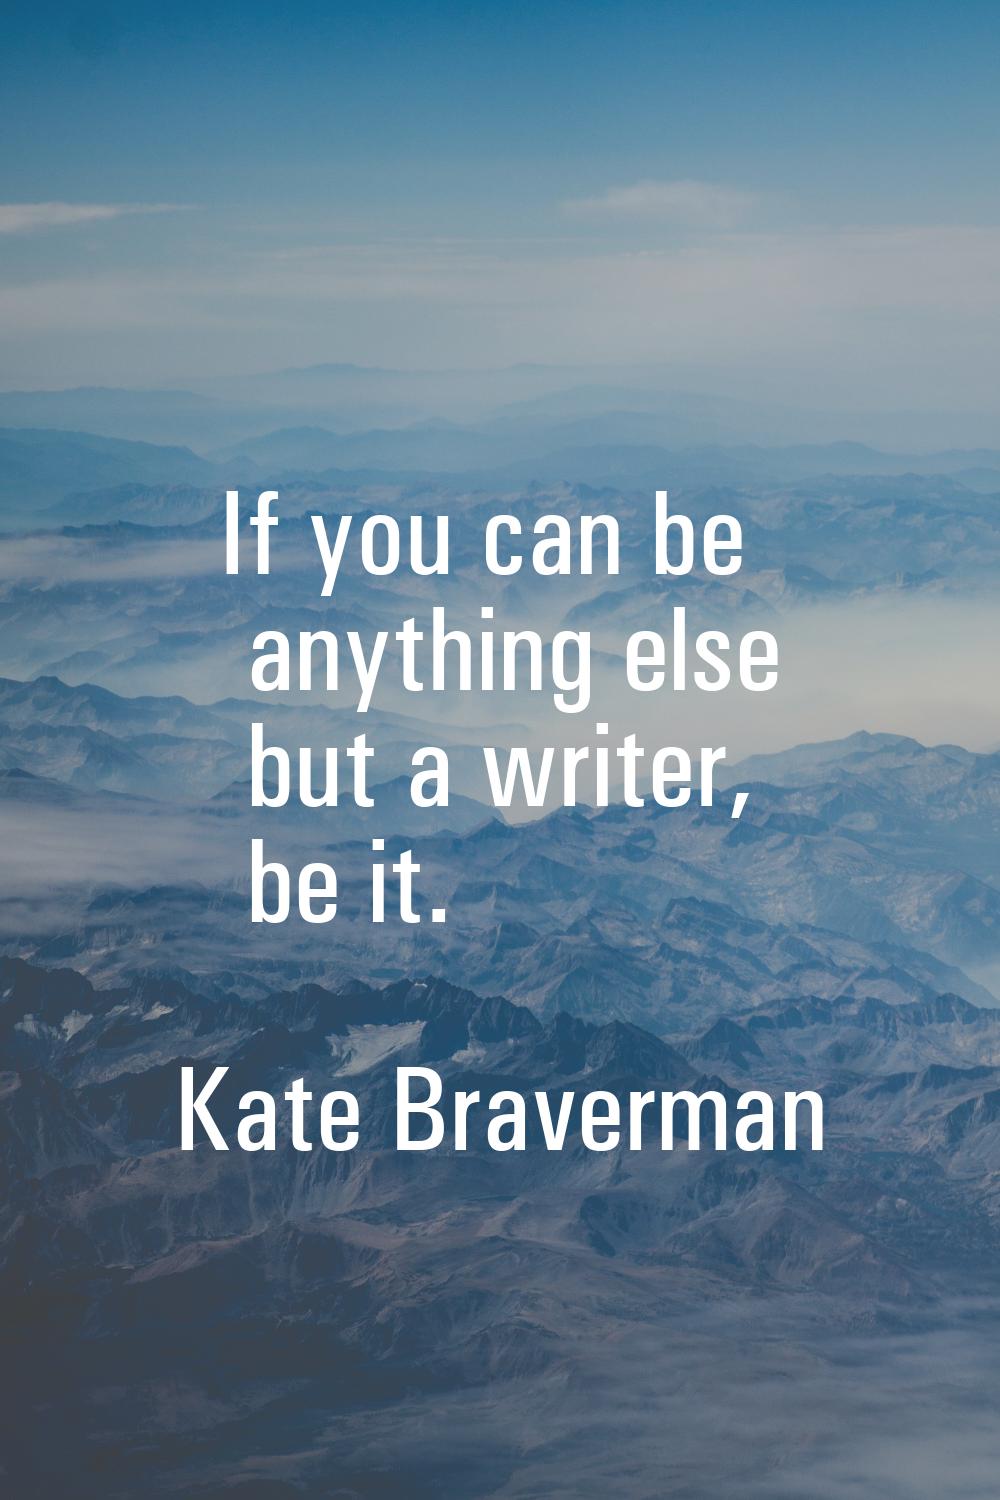 If you can be anything else but a writer, be it.